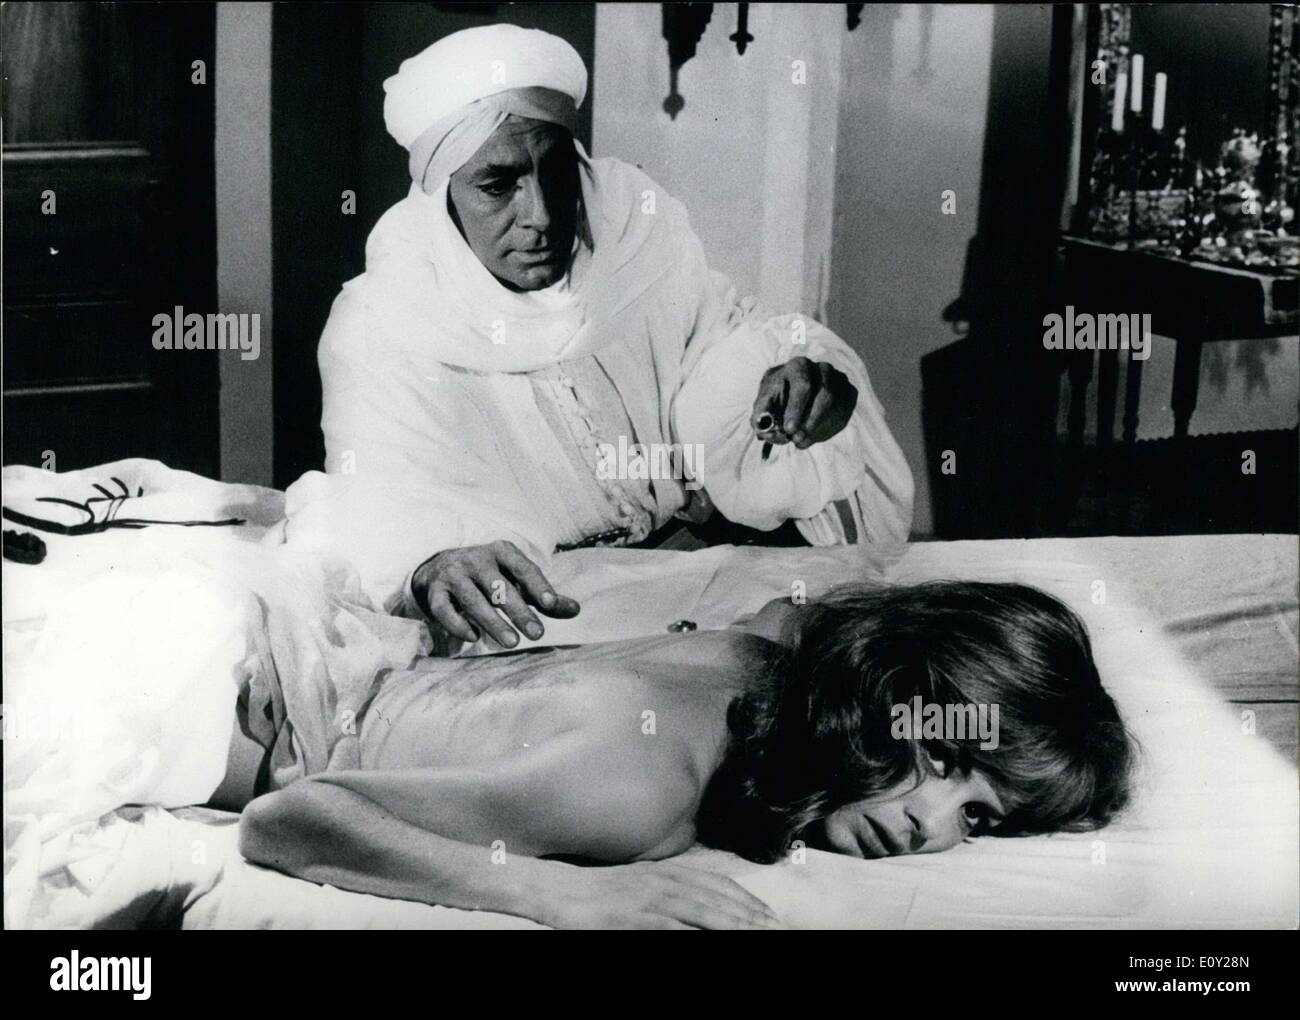 Aug. 23, 1968 - Pictured is a scene from the Angelique series of movies. This movie is titled ''Angelique und der Sultan,'' and Stock Photo